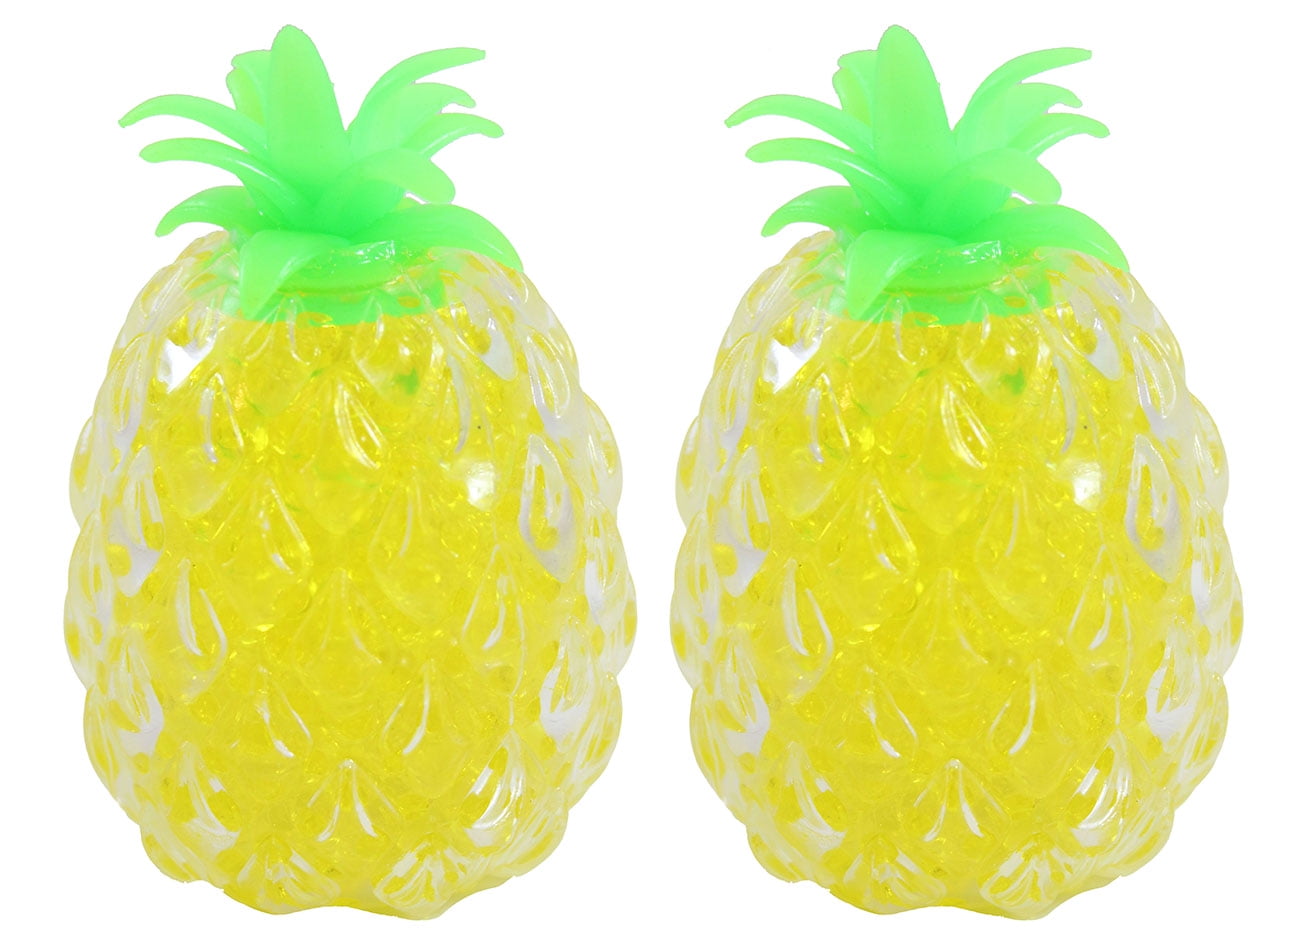 Squishy Toy Pineapple Strawberry key chain phone Gift Present Stress relieve 